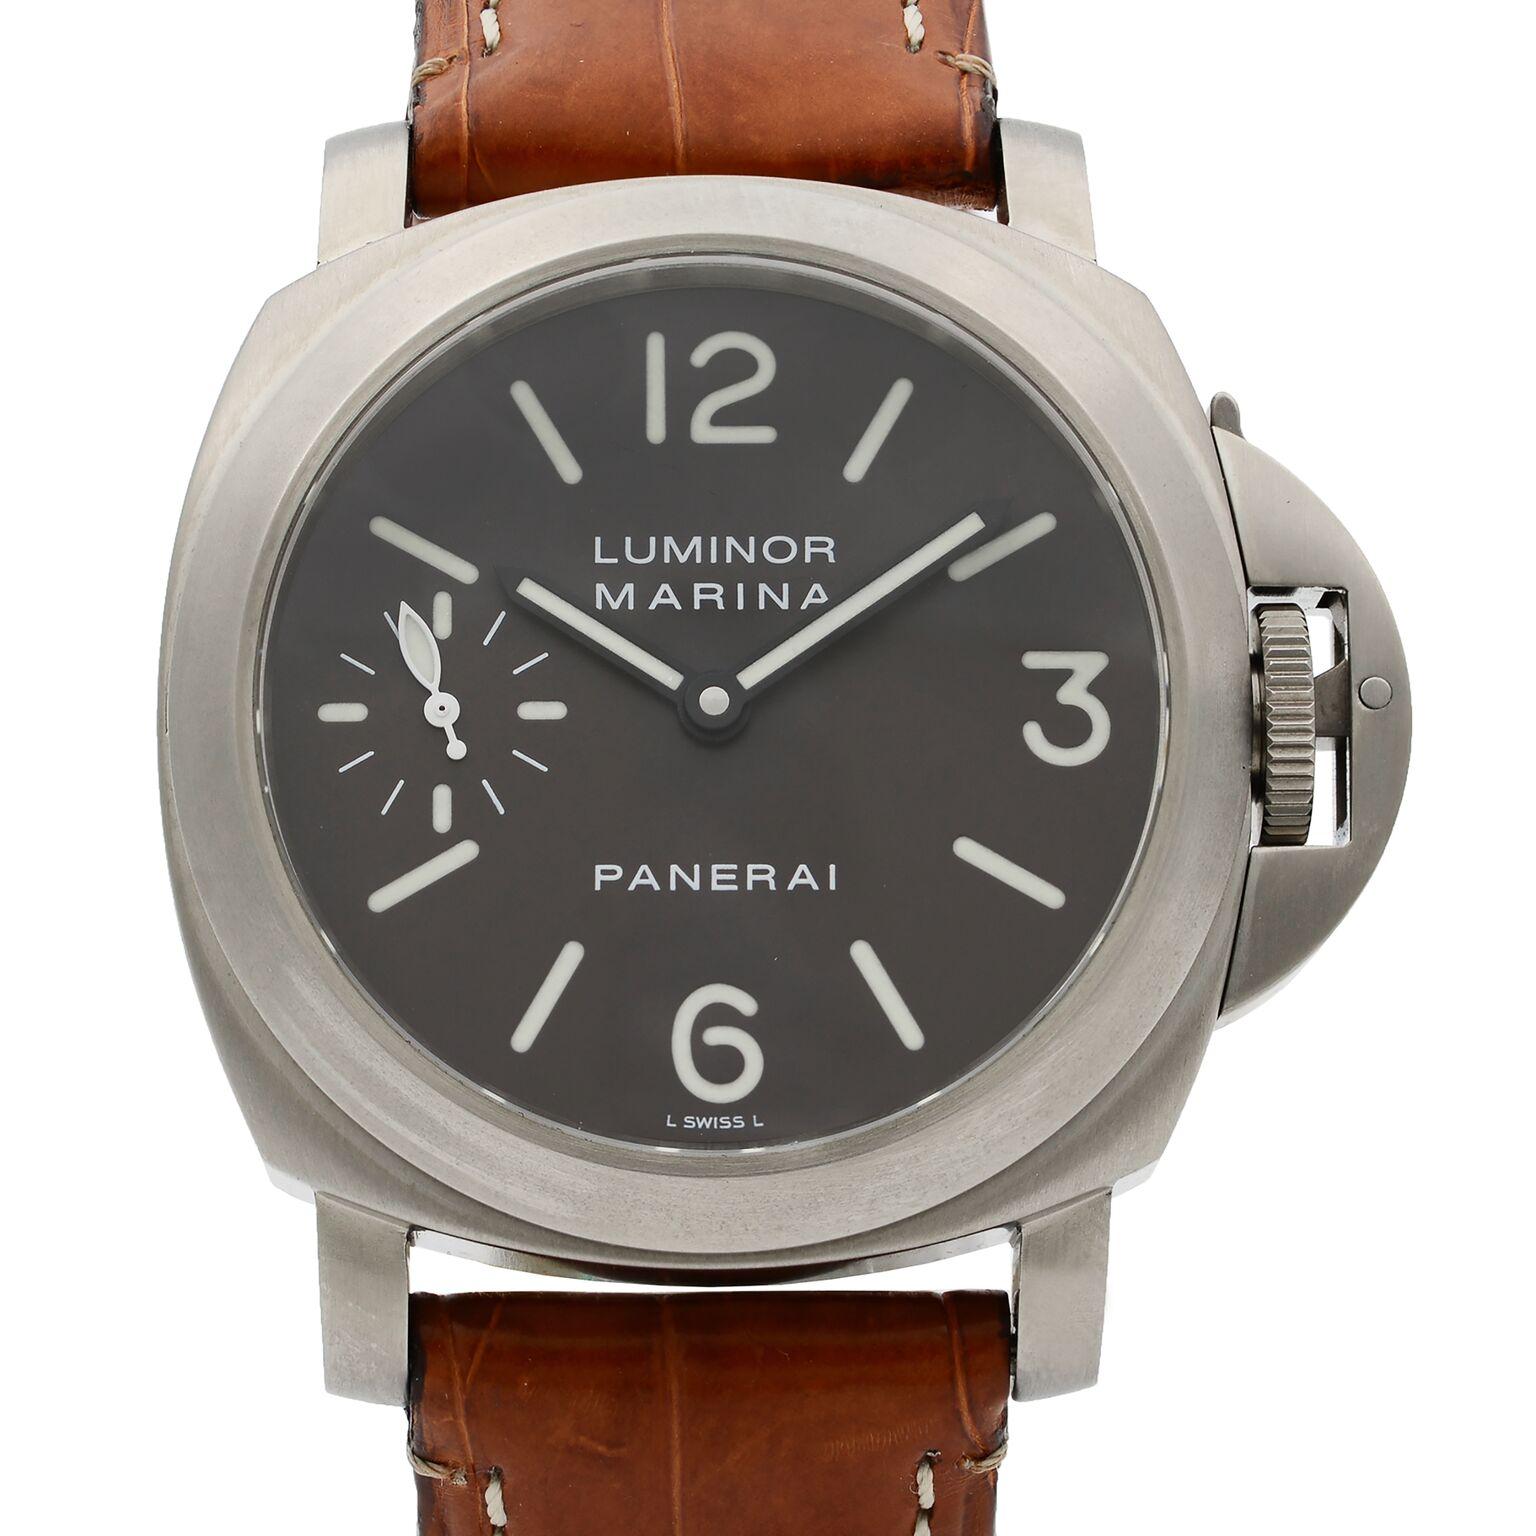 This pre-owned Panerai Luminor Marina  PAM00061 is a beautiful men's timepiece that is powered by mechanical (automatic) movement which is cased in a titanium case. It has a round shape face, date indicator dial and has hand sticks & numerals style